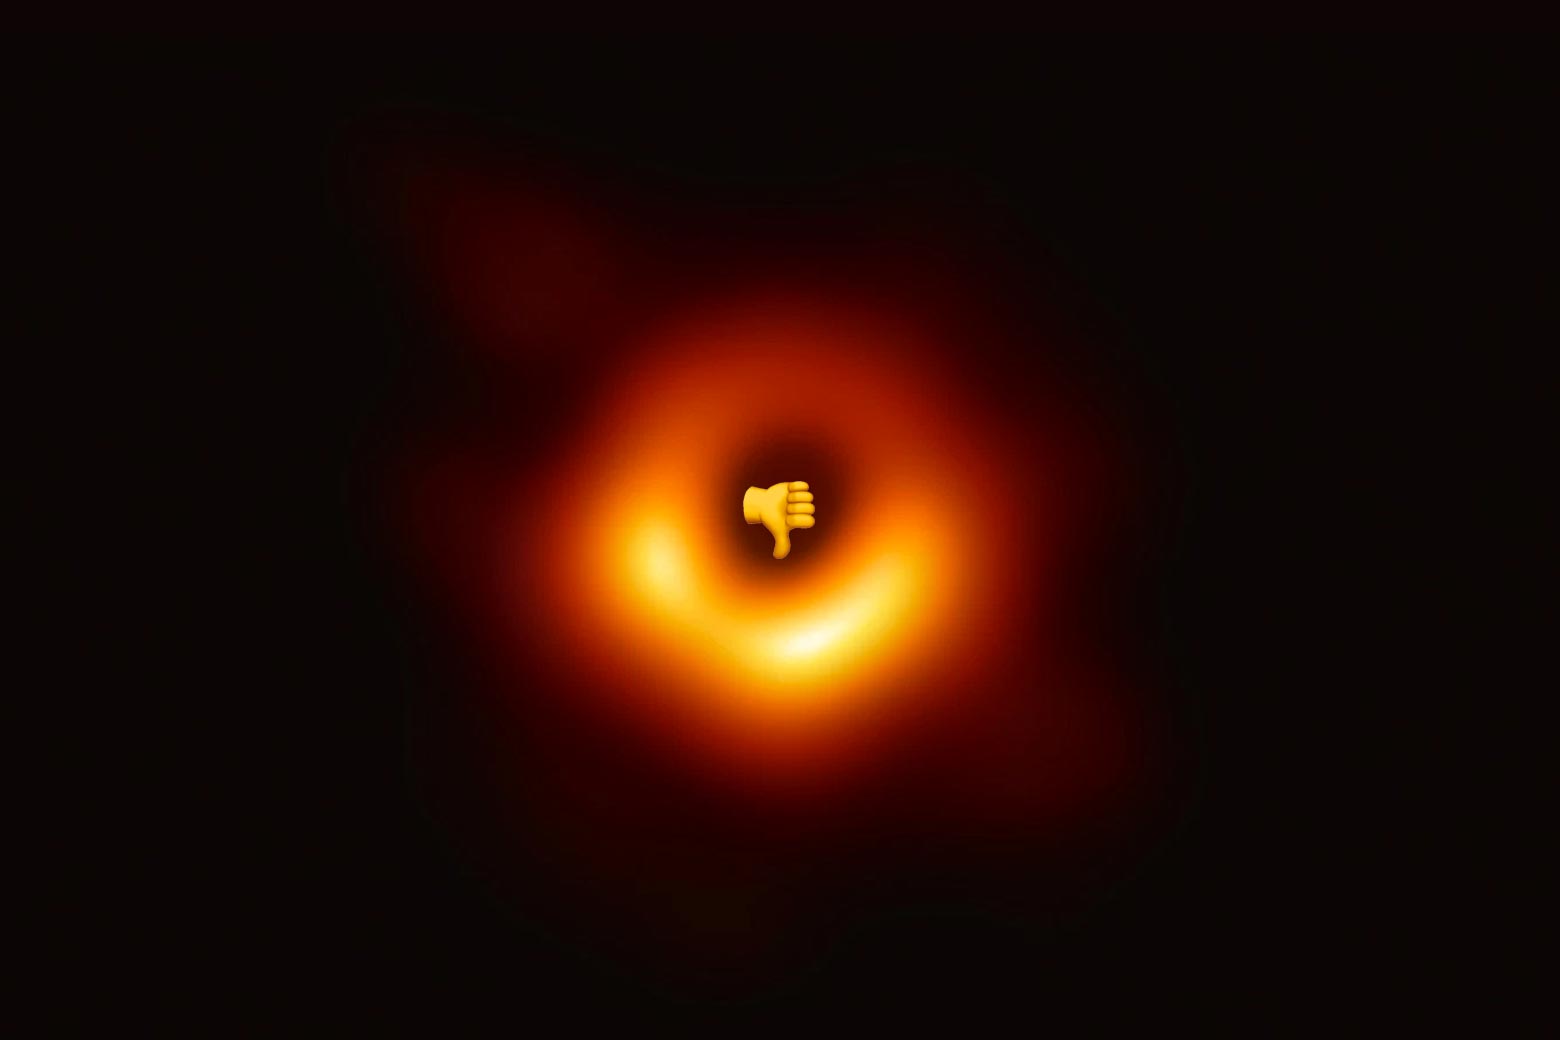 The black hole with a thumbs-down emoji in the center.